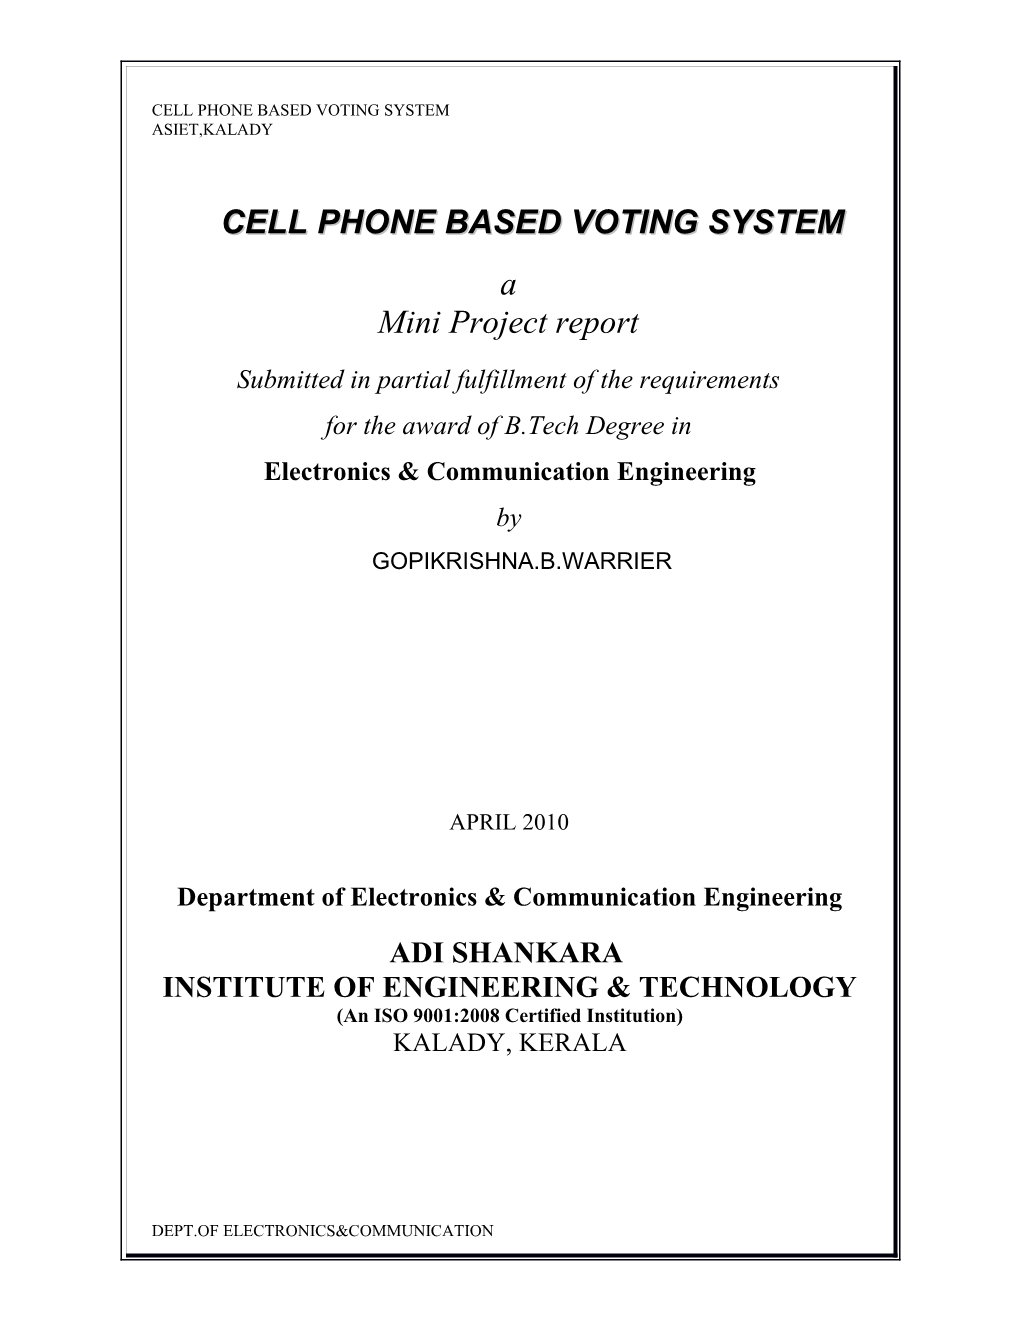 Cell Phone Based Voting System Asiet,Kalady